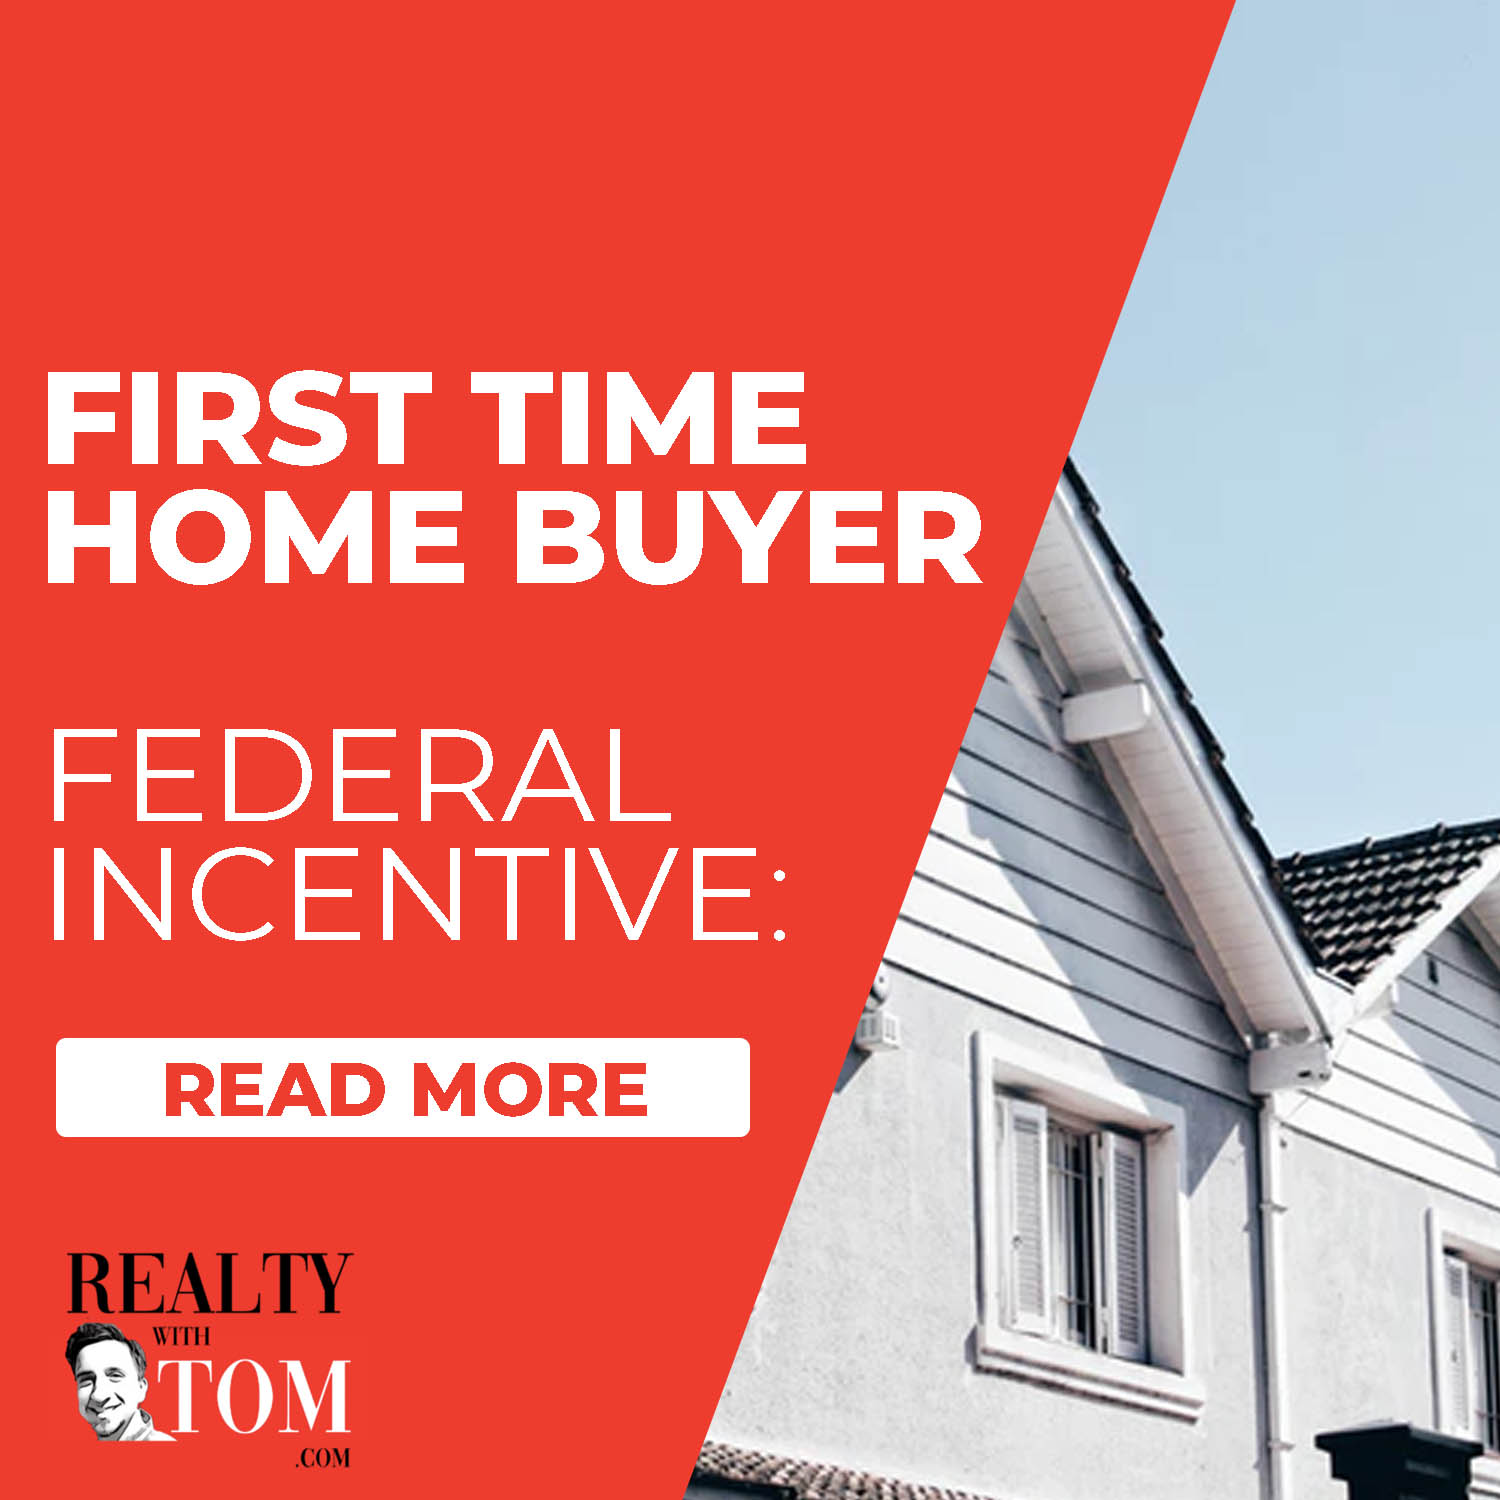 First Time Home Buyer Federal Incentive Realty with Tom